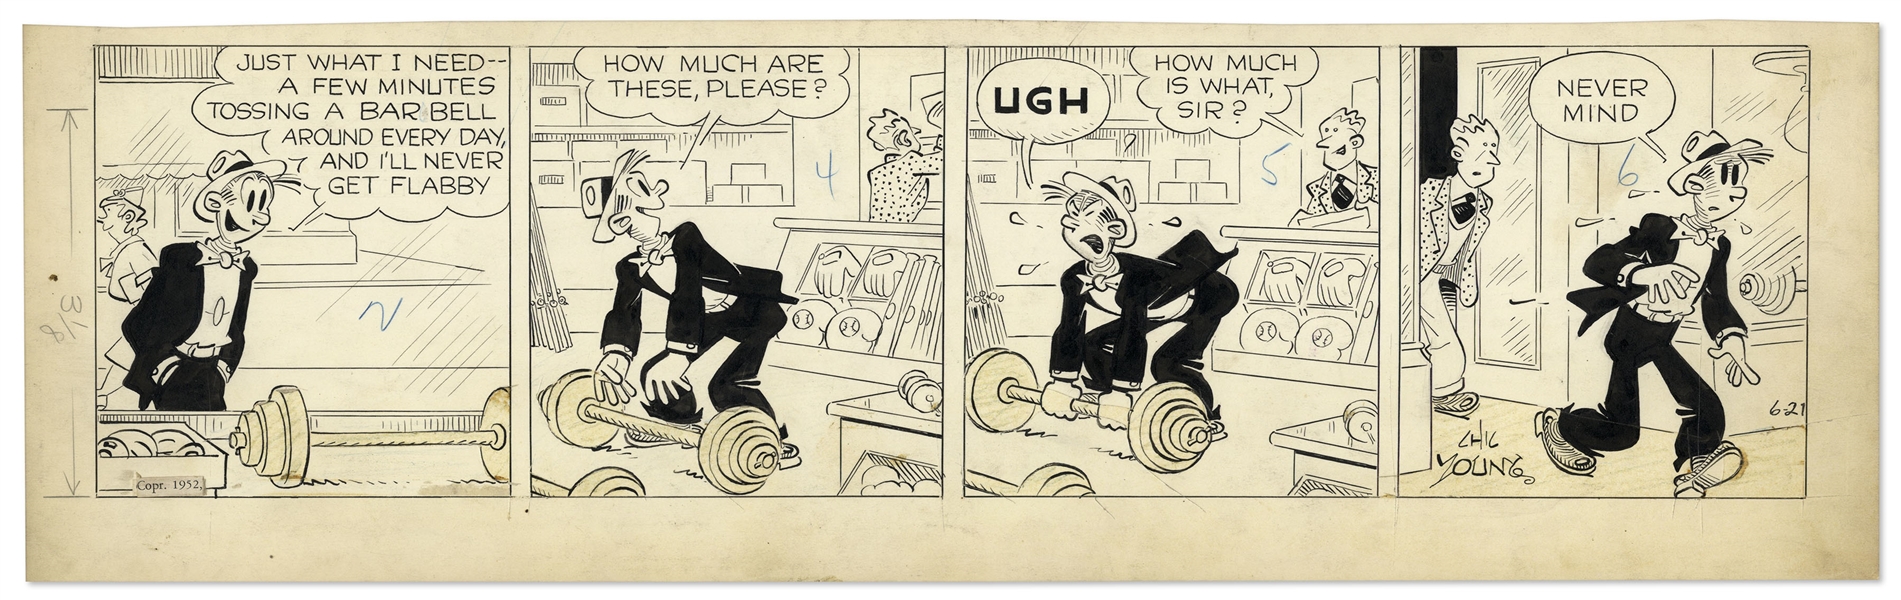 Lot of 2 Chic Young Hand-Drawn ''Blondie'' Comic Strips From 1952 -- Titled ''It's a Love Story He's Reading'' and ''His Budget's Enough to Balance''